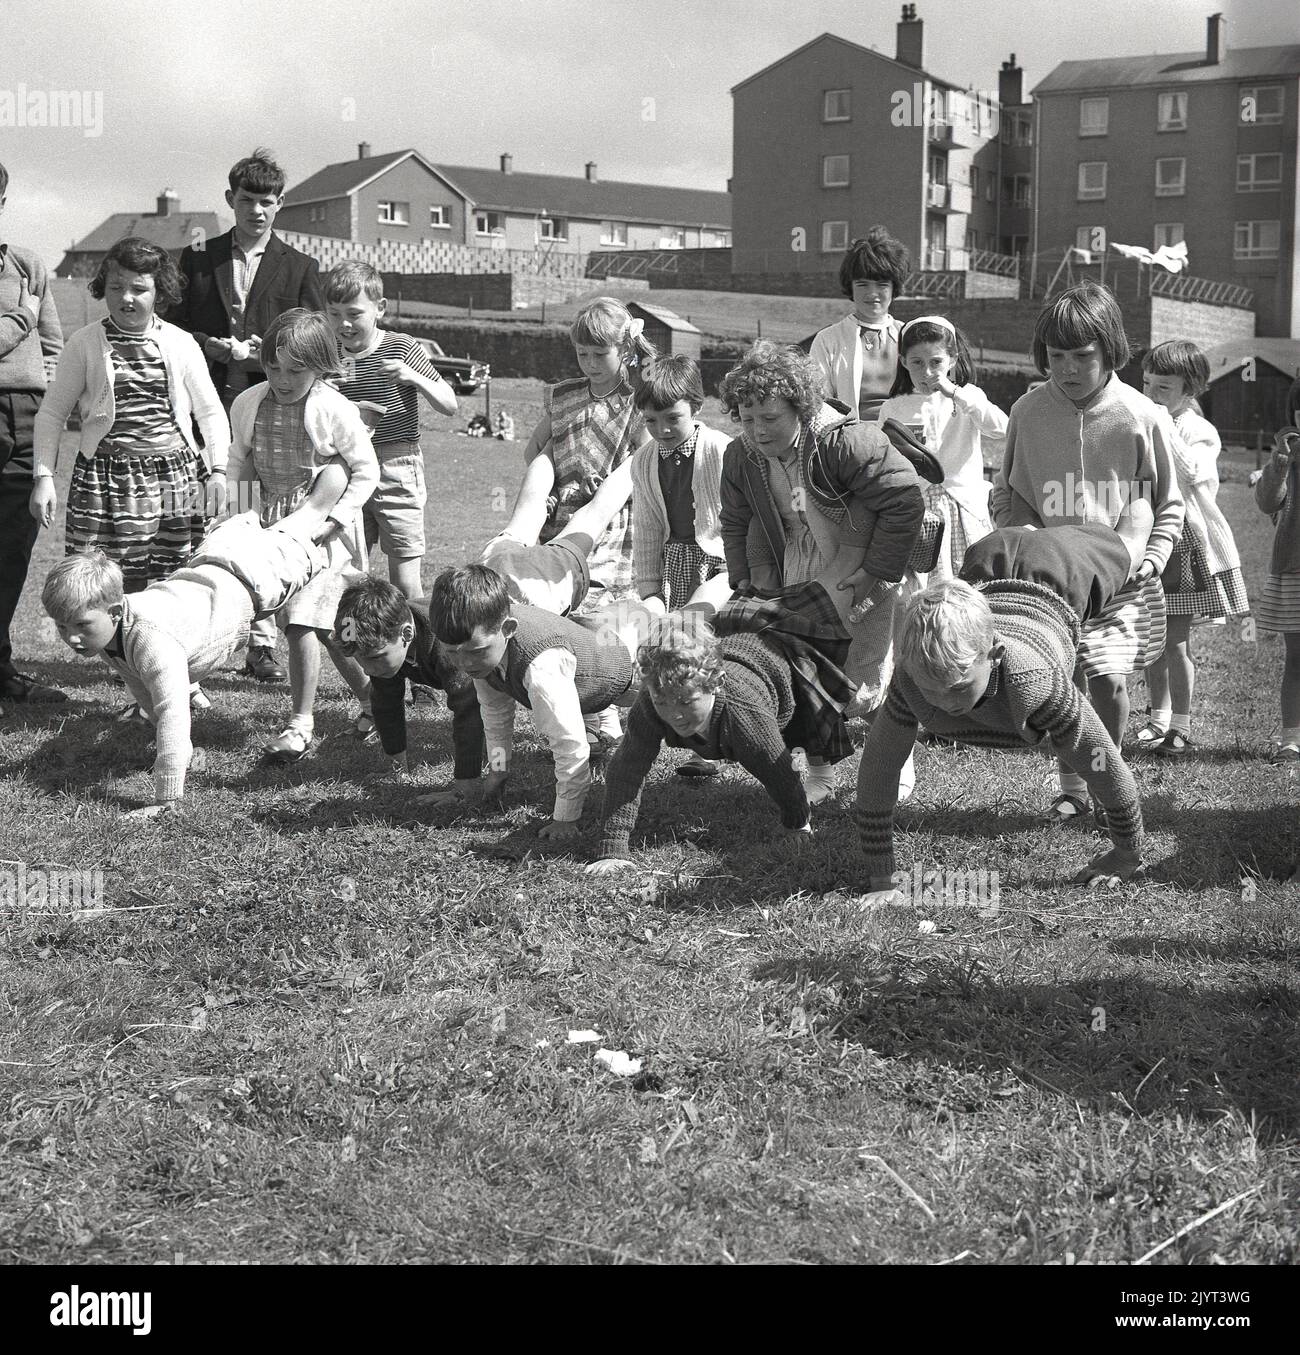 1965, historical, n. queensferry gala day, children ready to start a game, a wheel-barrow race outside on the grass in the grounds of a housing estate at North Queensferry, Fife, Scotland, UK, the young girls holding the boys legs! Stock Photo